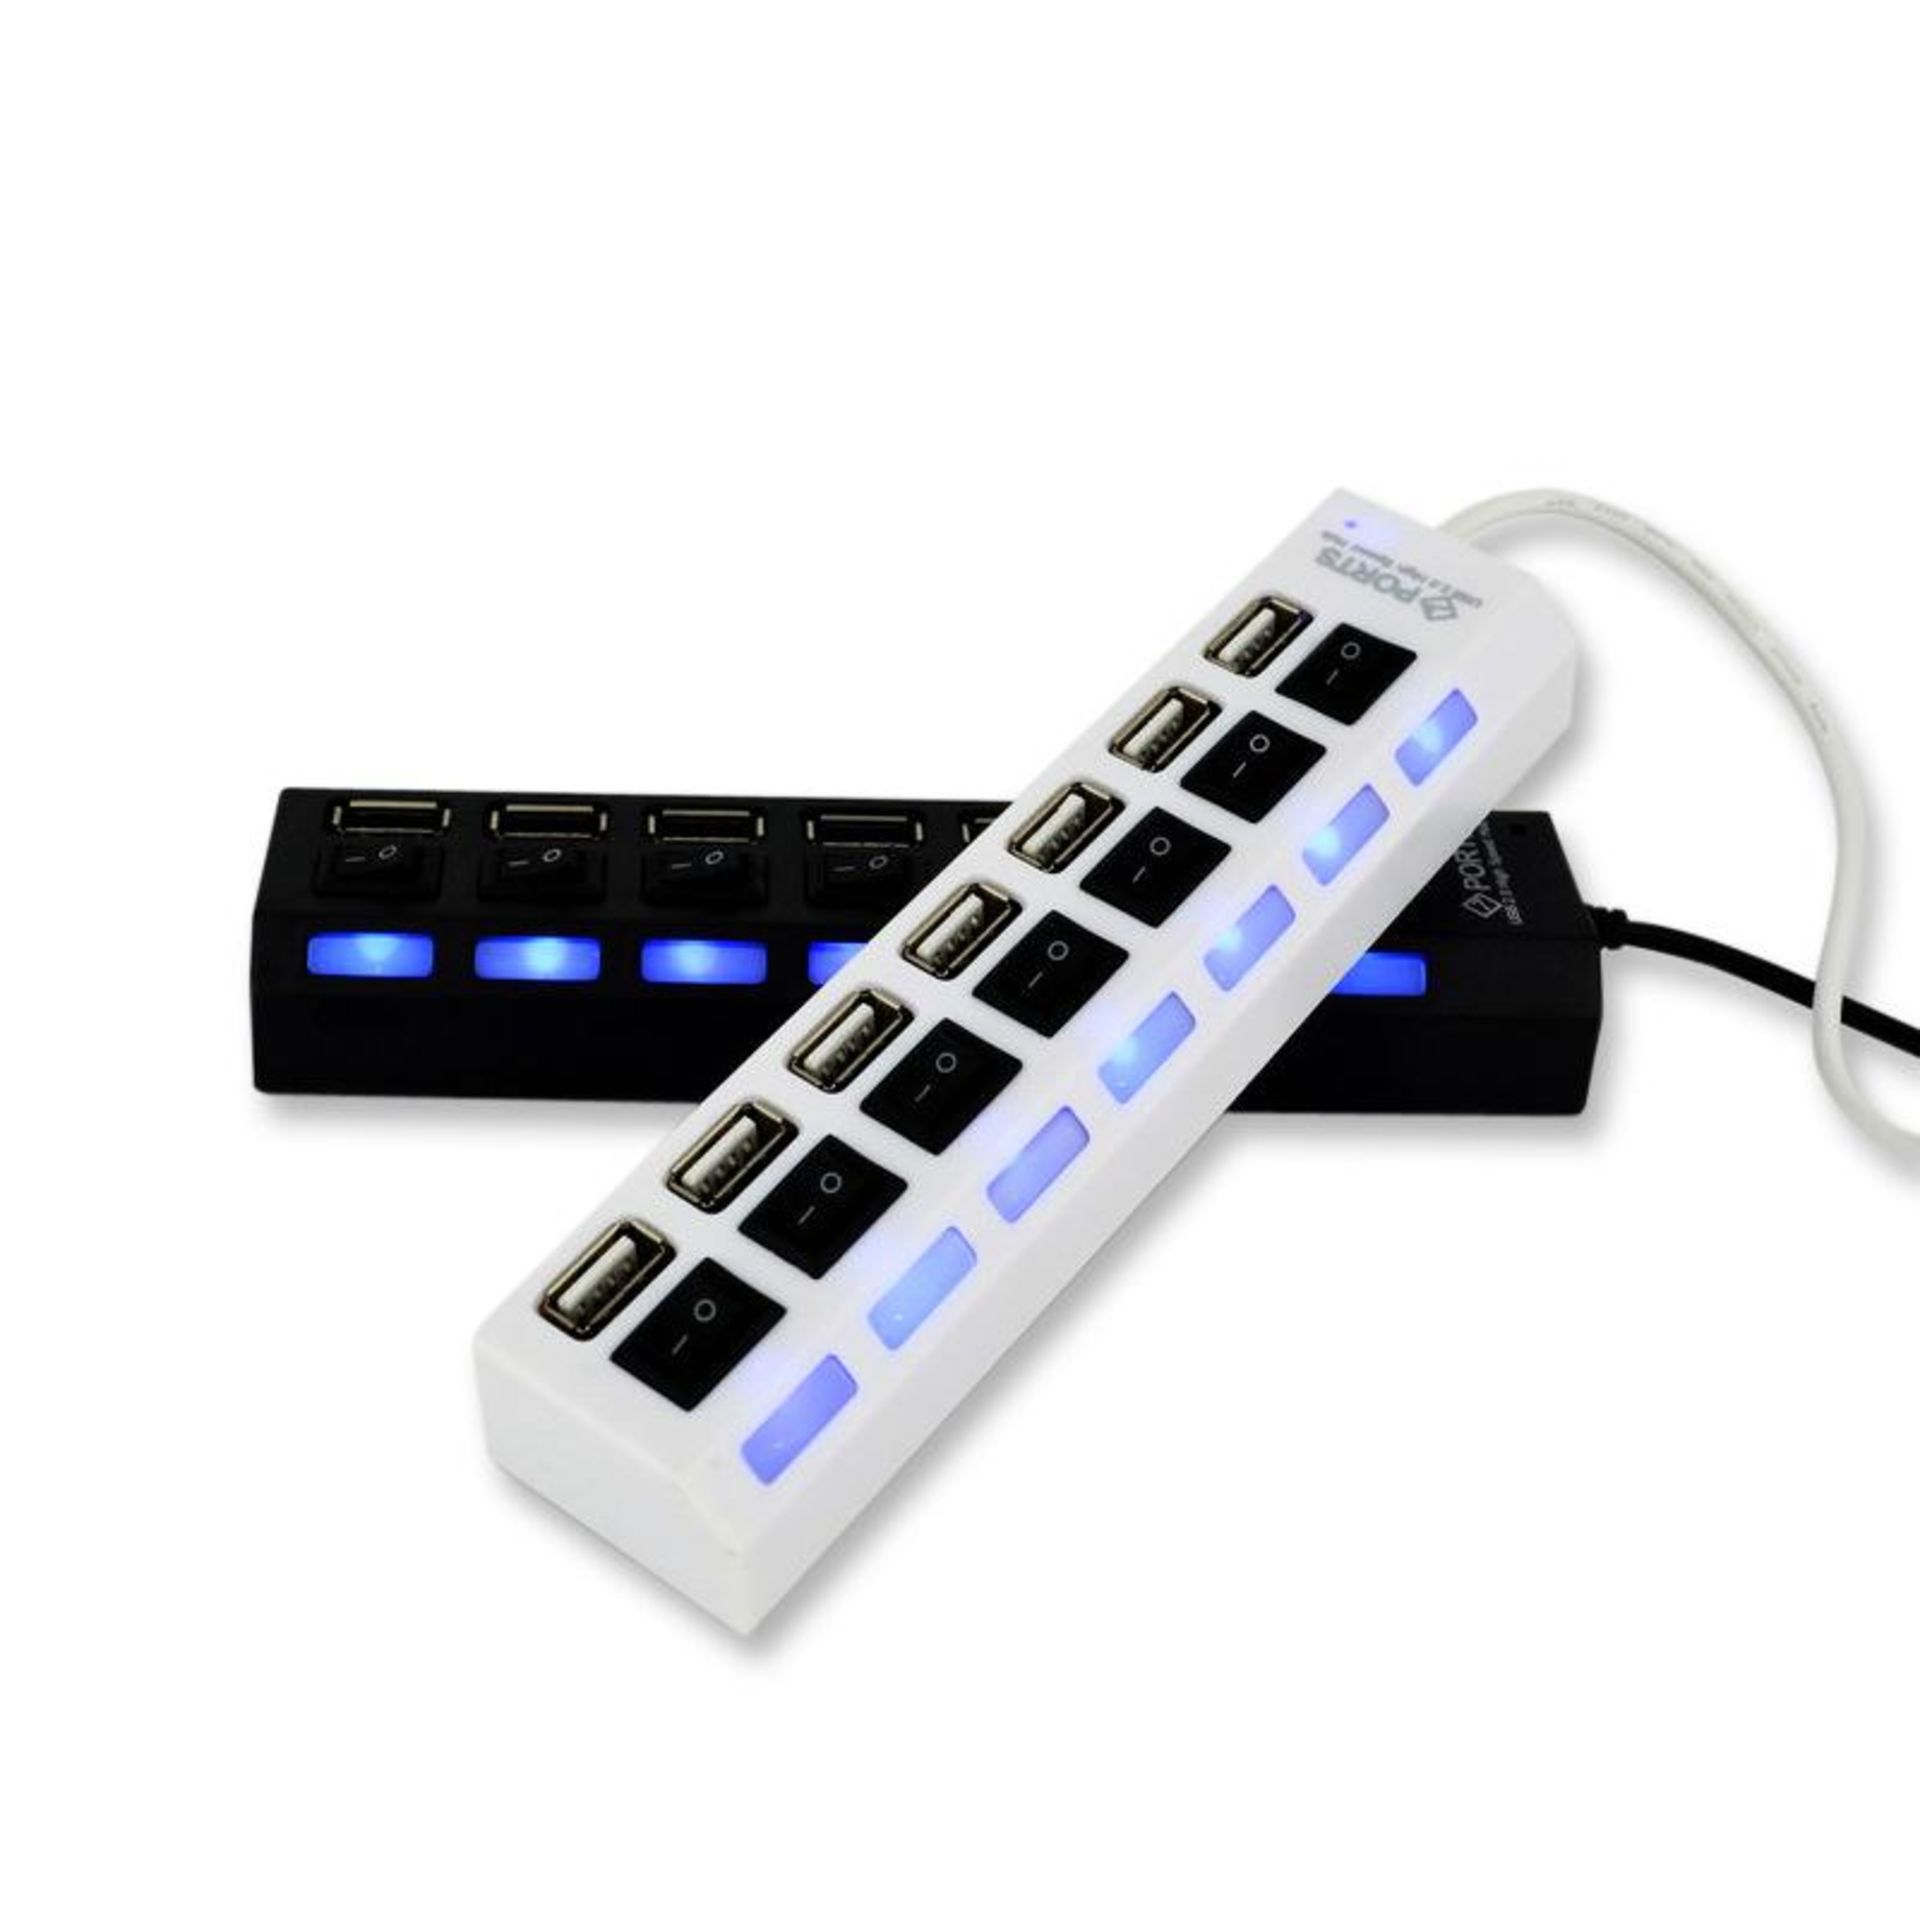 Brand New 7 Port USB High Speed Hub - On/Off Switch on Each Port - With Blue LED Indicators -